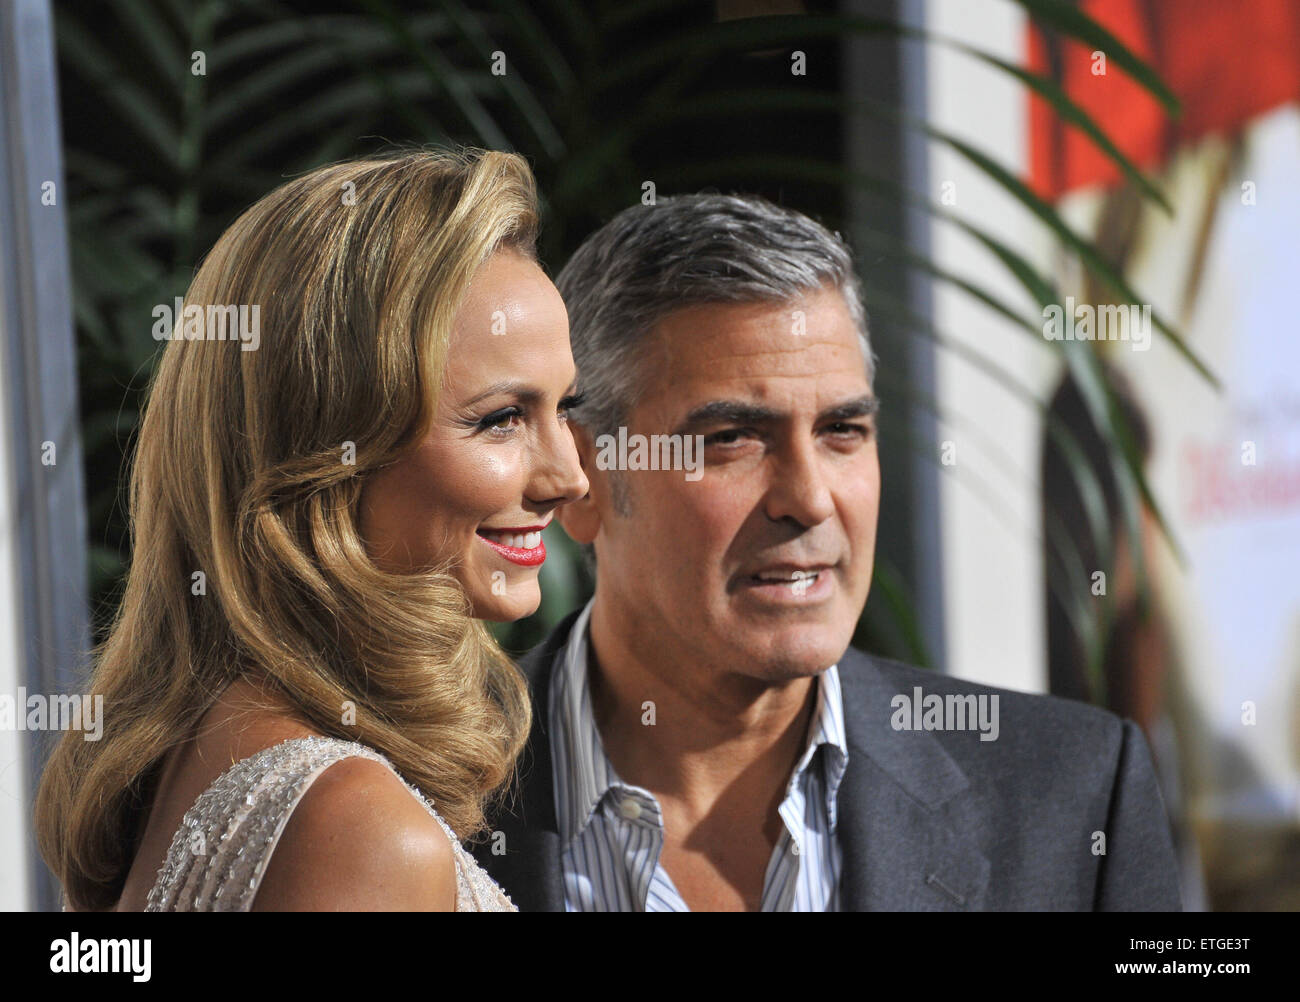 BEVERLY HILLS, CA - NOVEMBER 15, 2011: George Clooney & girlfriend Stacy Keibler at the Los Angeles premiere of his new movie 'The Descendants' at the Samuel Goldwyn Theatre in Beverly Hills. November 15, 2011 Beverly Hills, CA Stock Photo